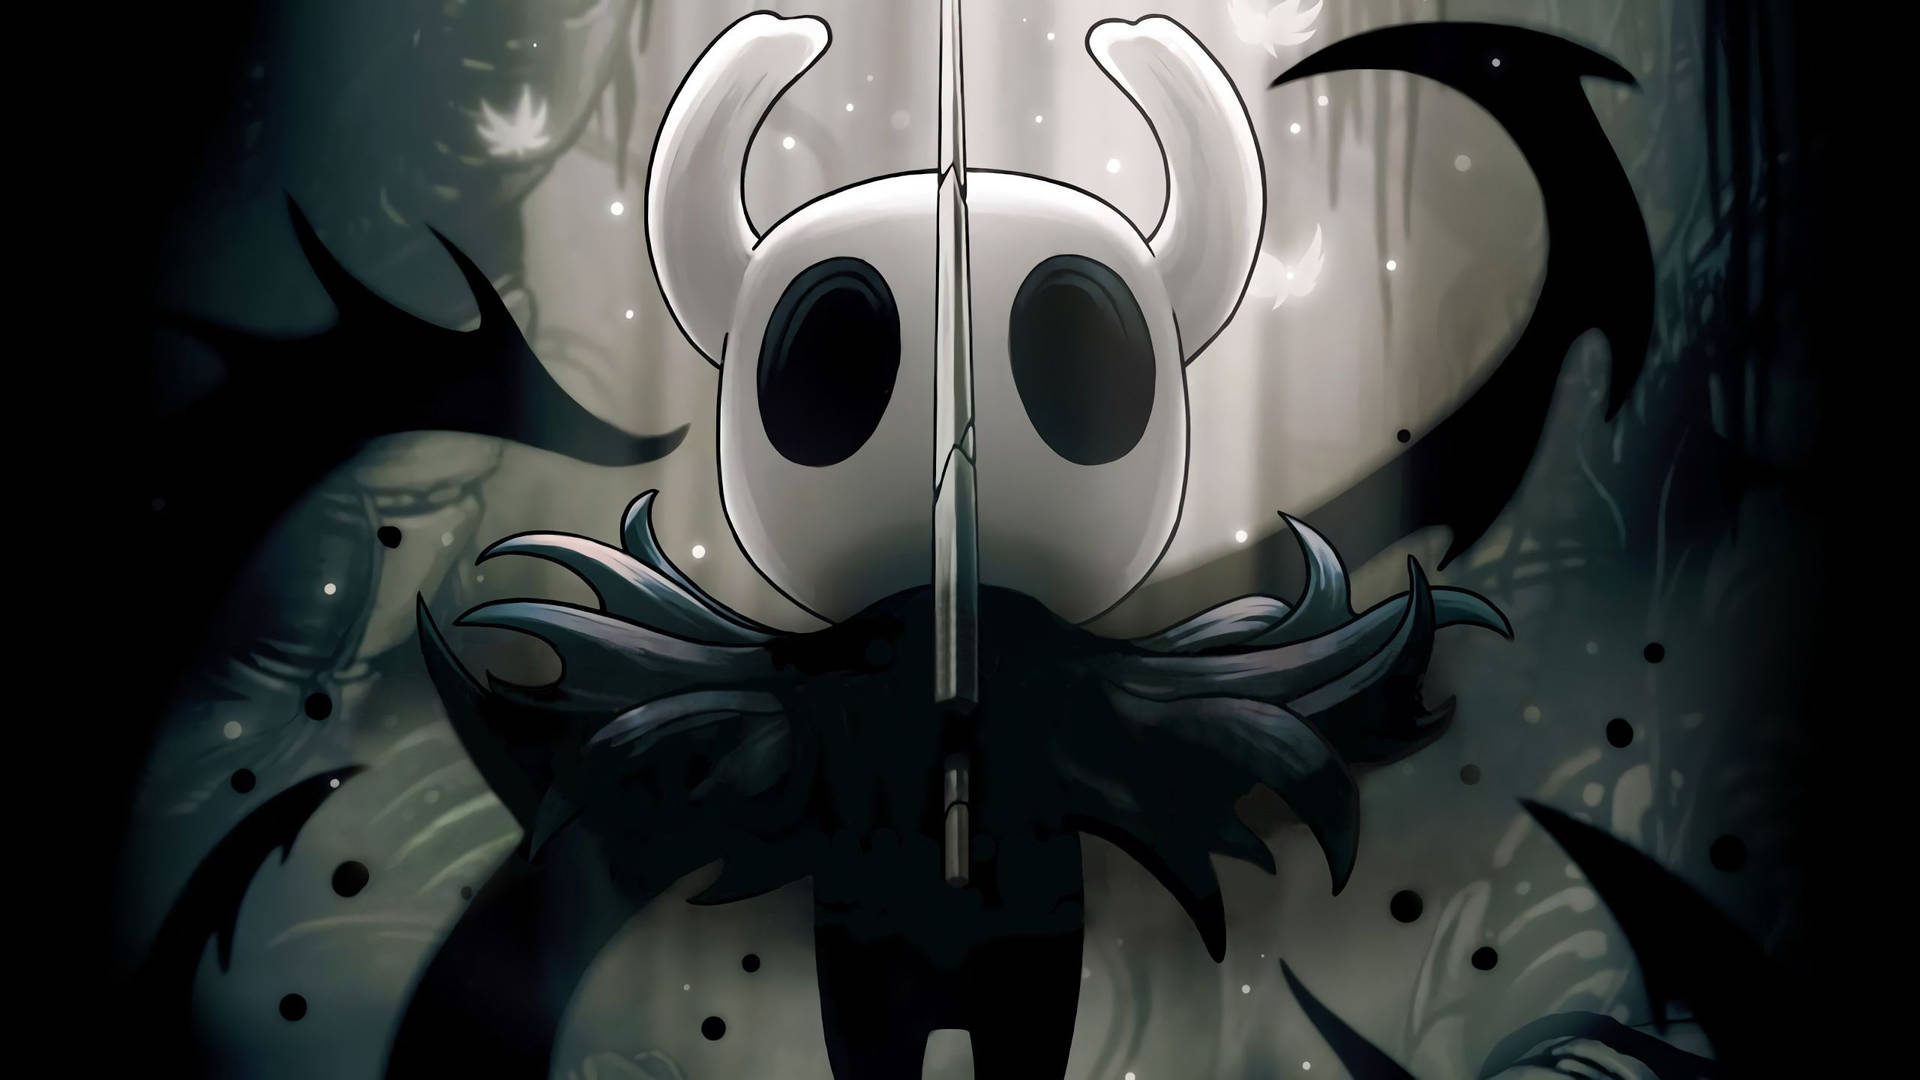 Join the Knight's journey and face the insidious Hollow Knight. Wallpaper